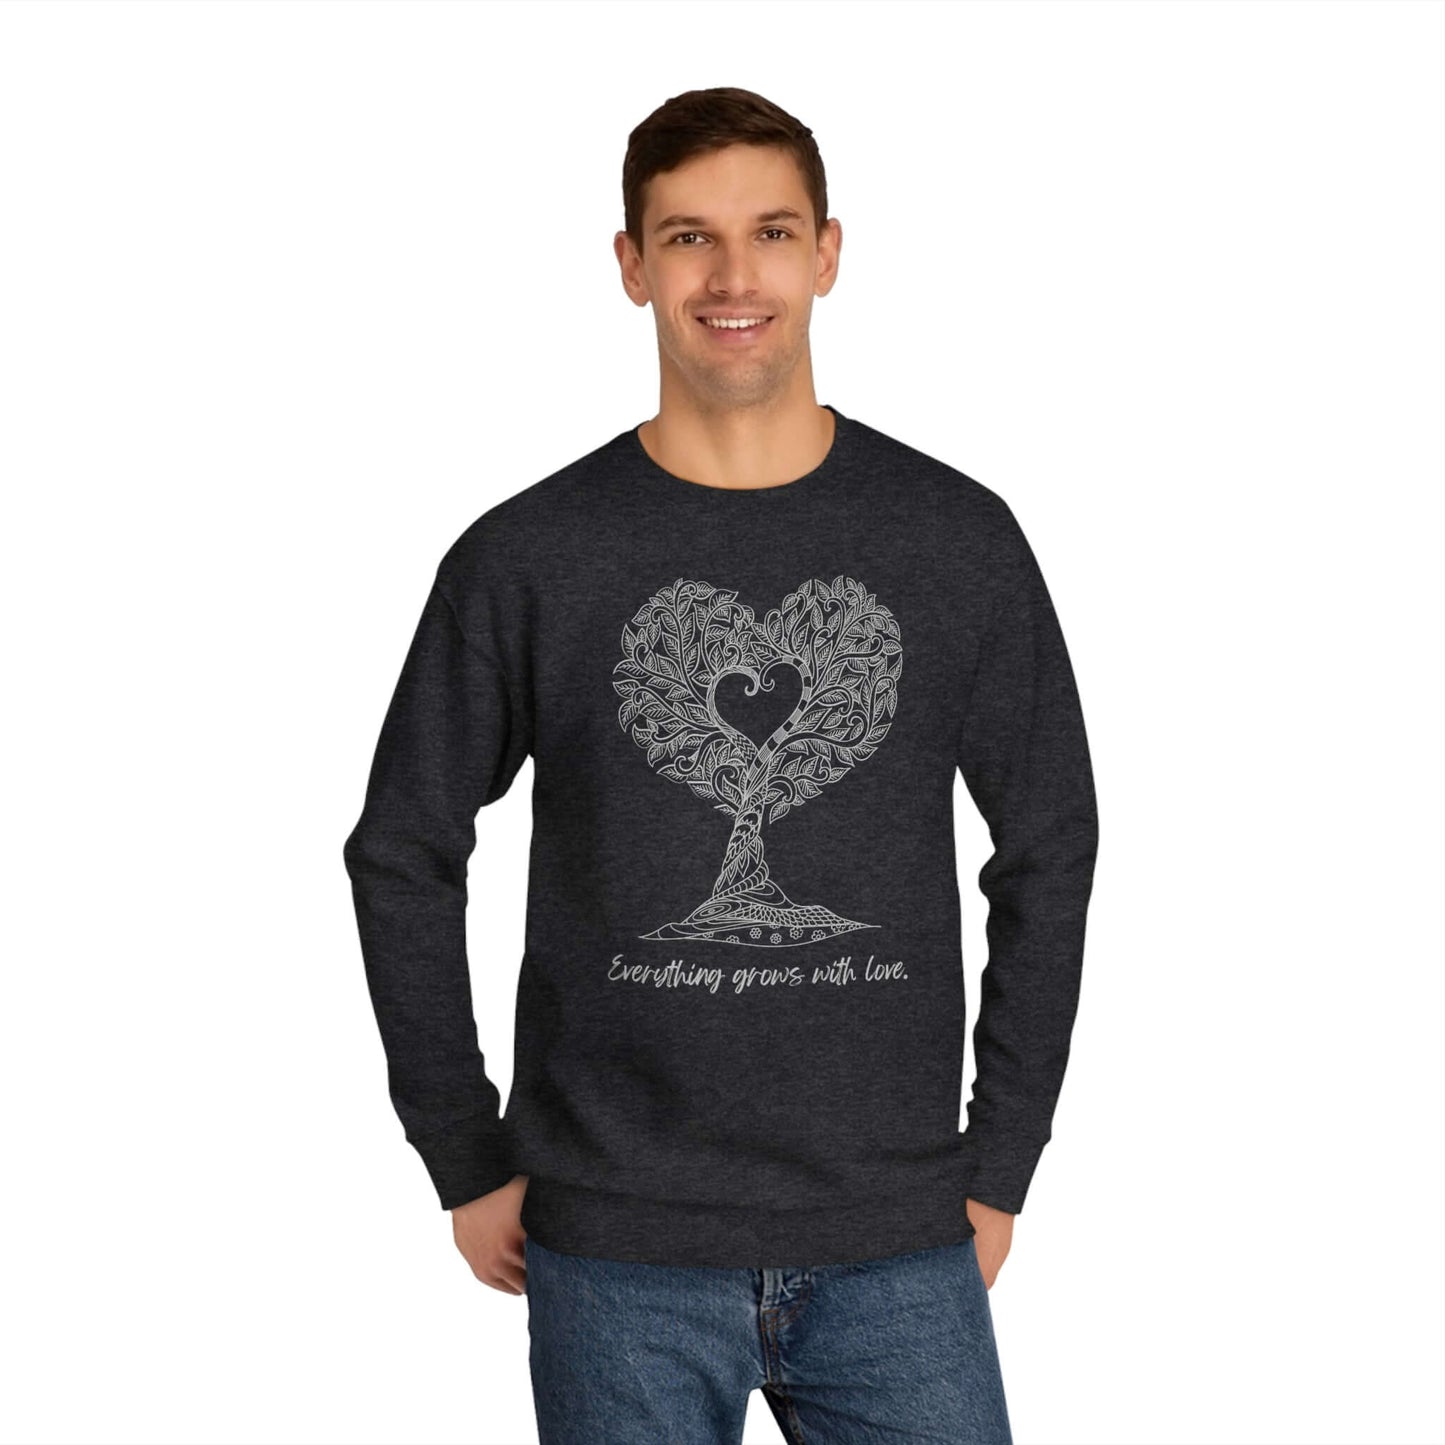 “Everything Grows With Love” Sweatshirt